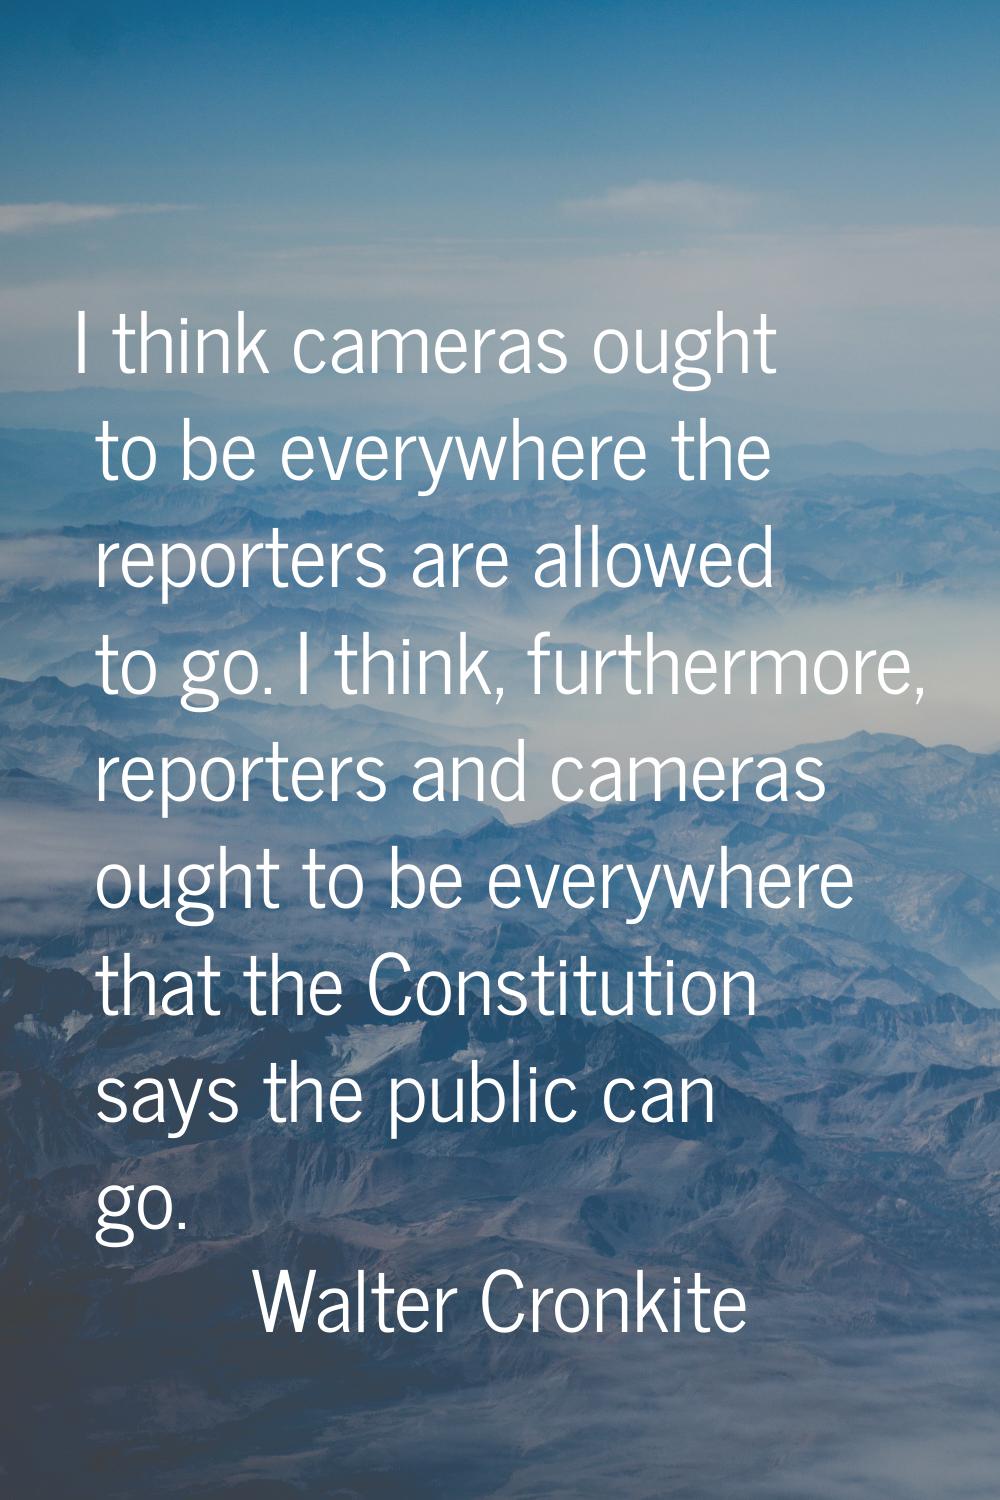 I think cameras ought to be everywhere the reporters are allowed to go. I think, furthermore, repor